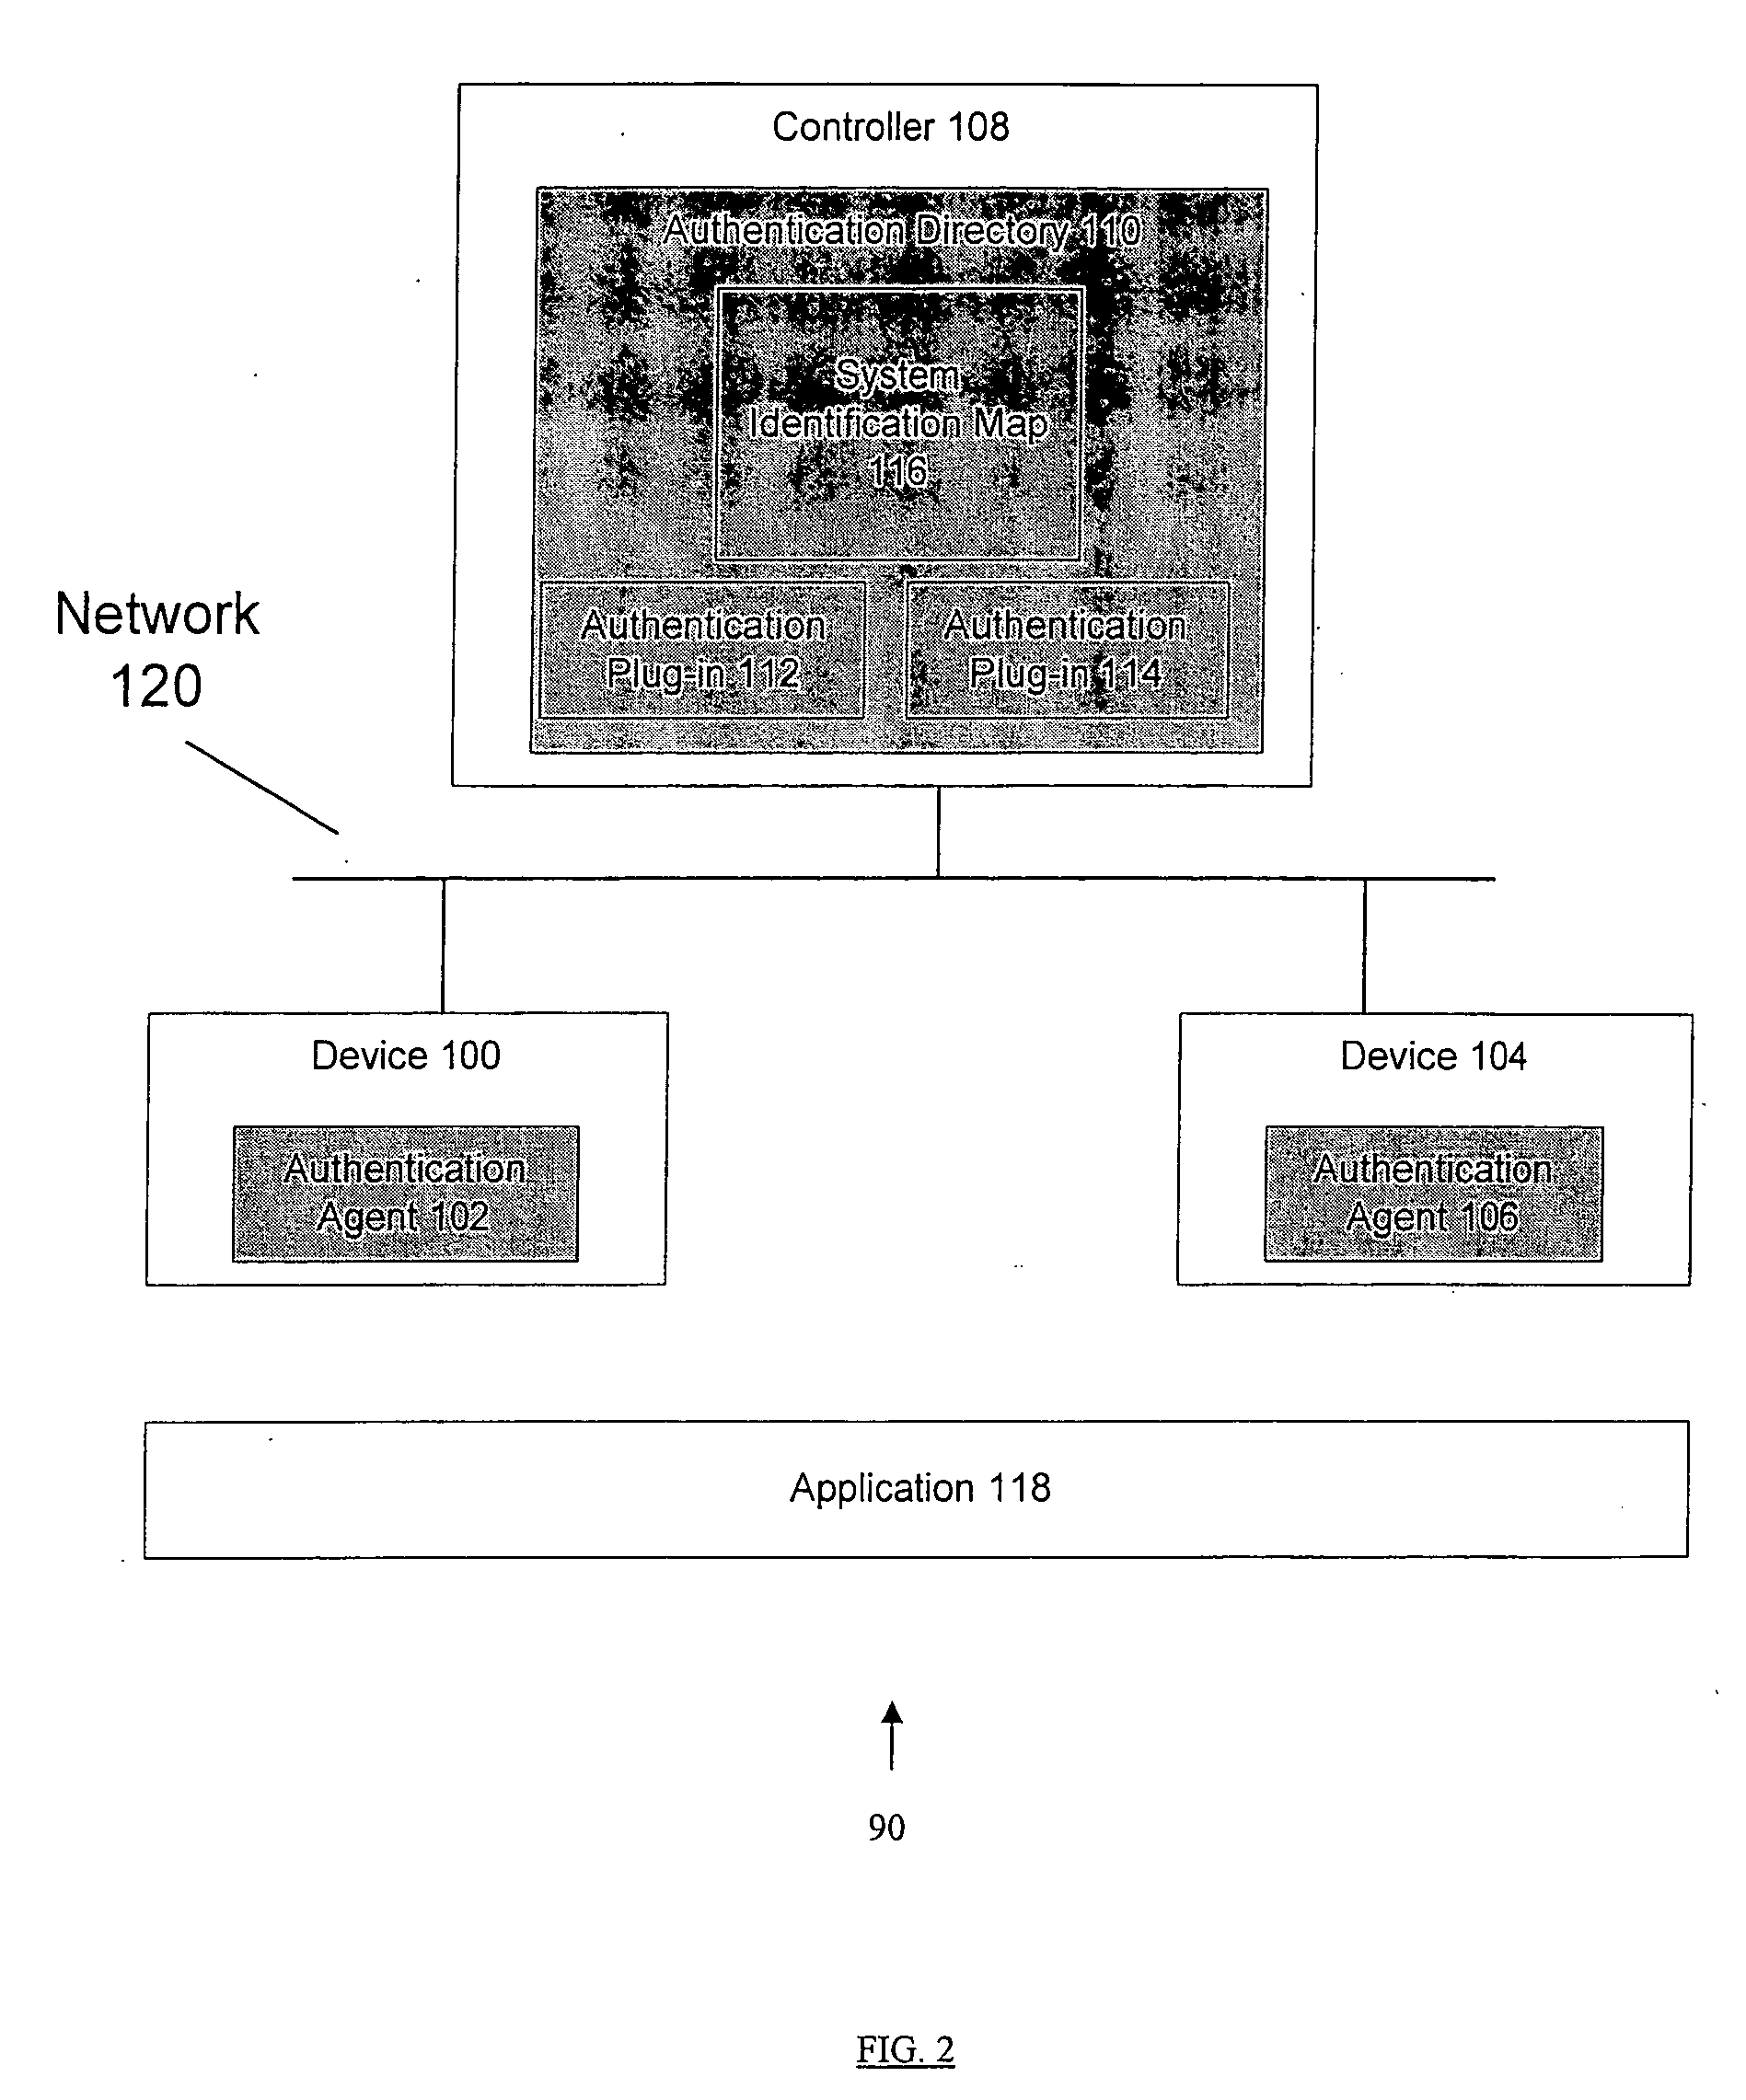 Method and system for single sign-on in a network